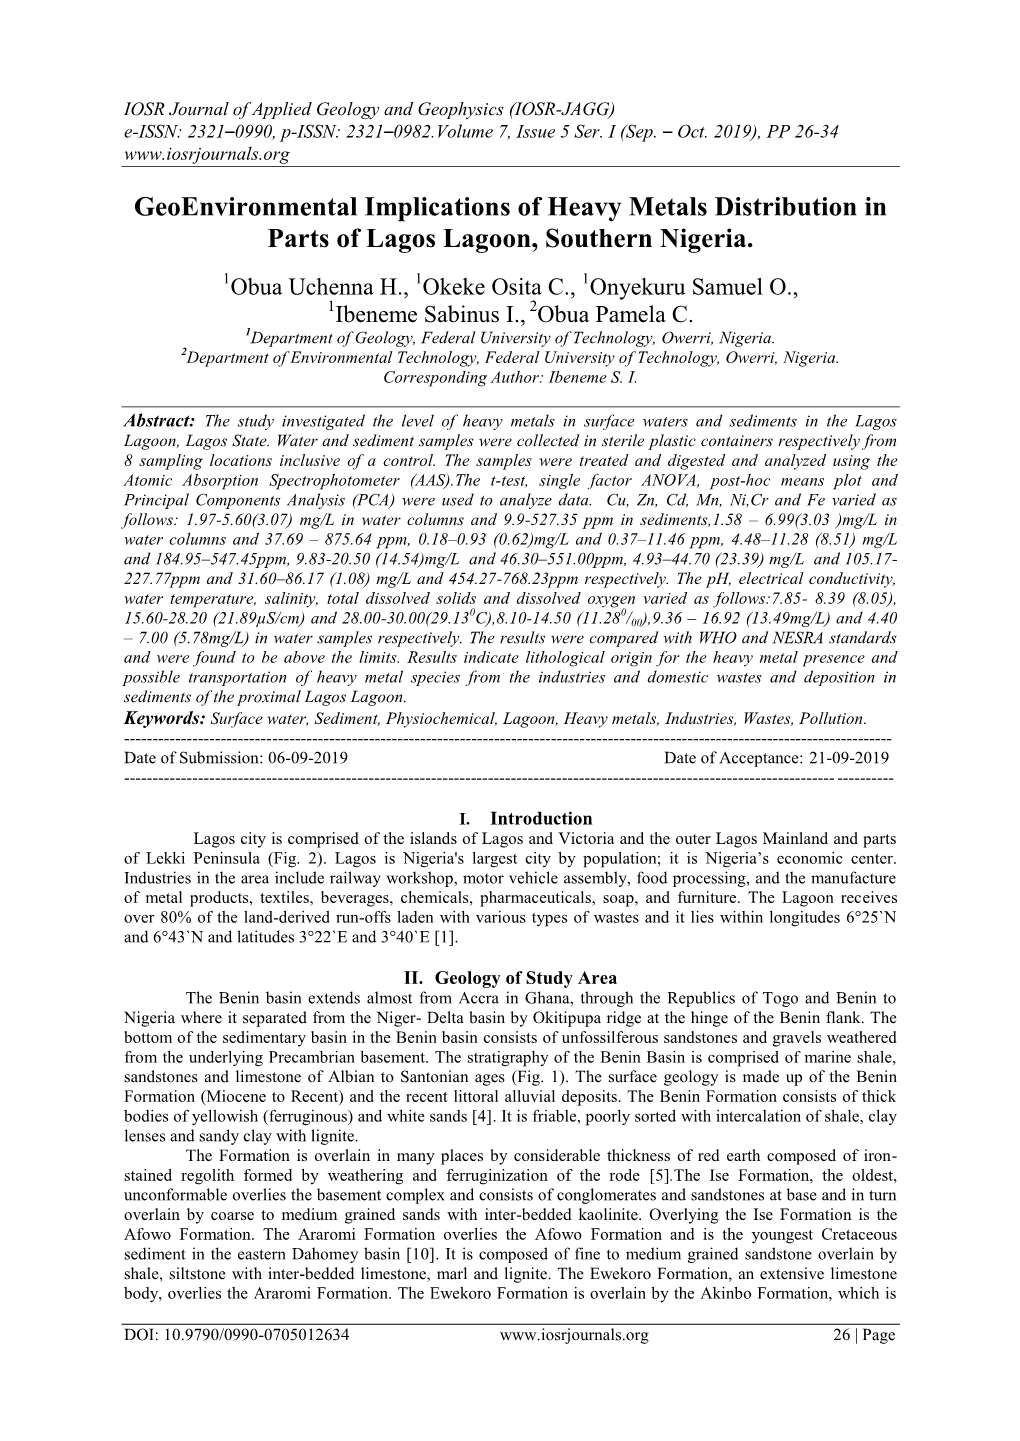 Geoenvironmental Implications of Heavy Metals Distribution in Parts of Lagos Lagoon, Southern Nigeria